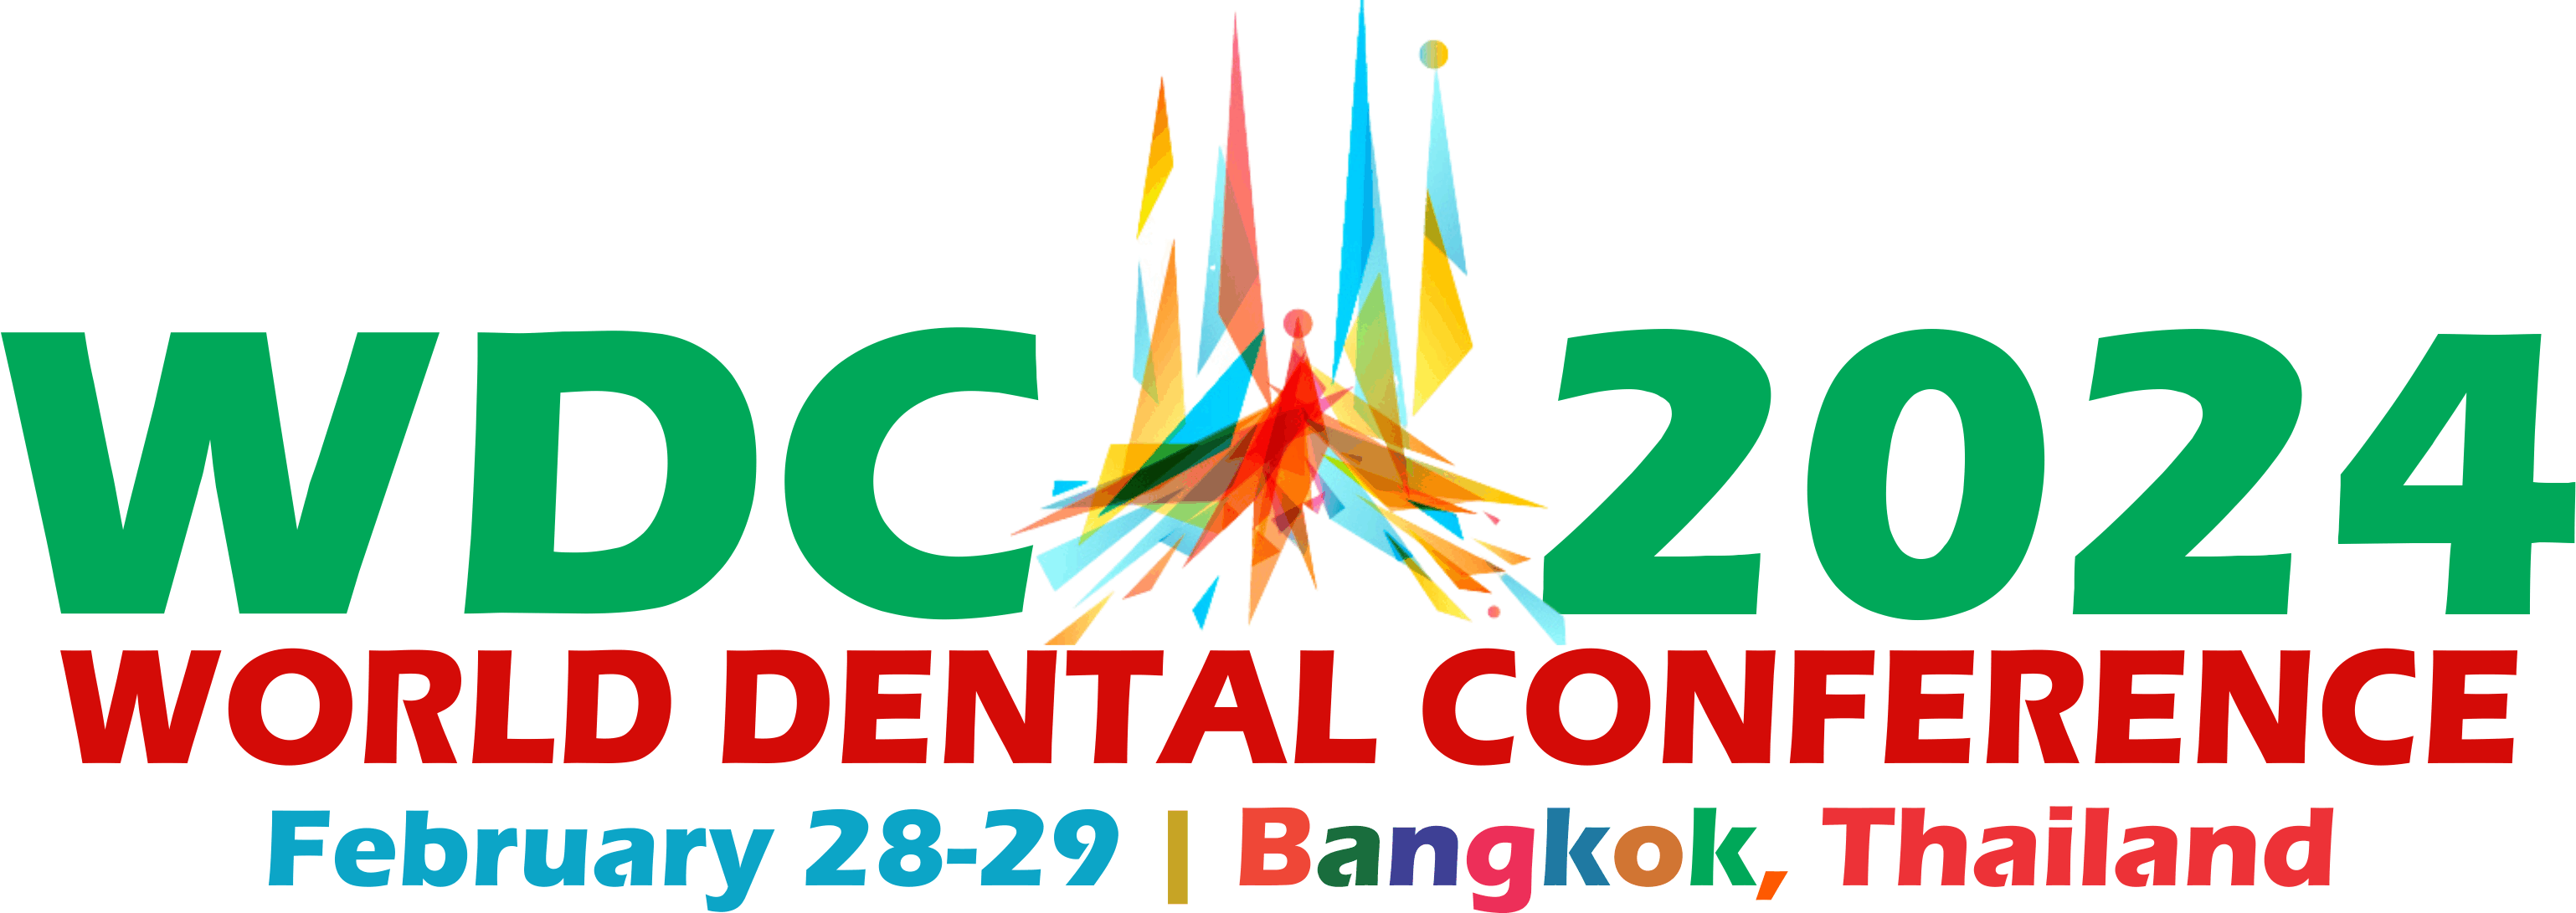 Abstract Submission WDC 2024 World Dental Conference Dentistry